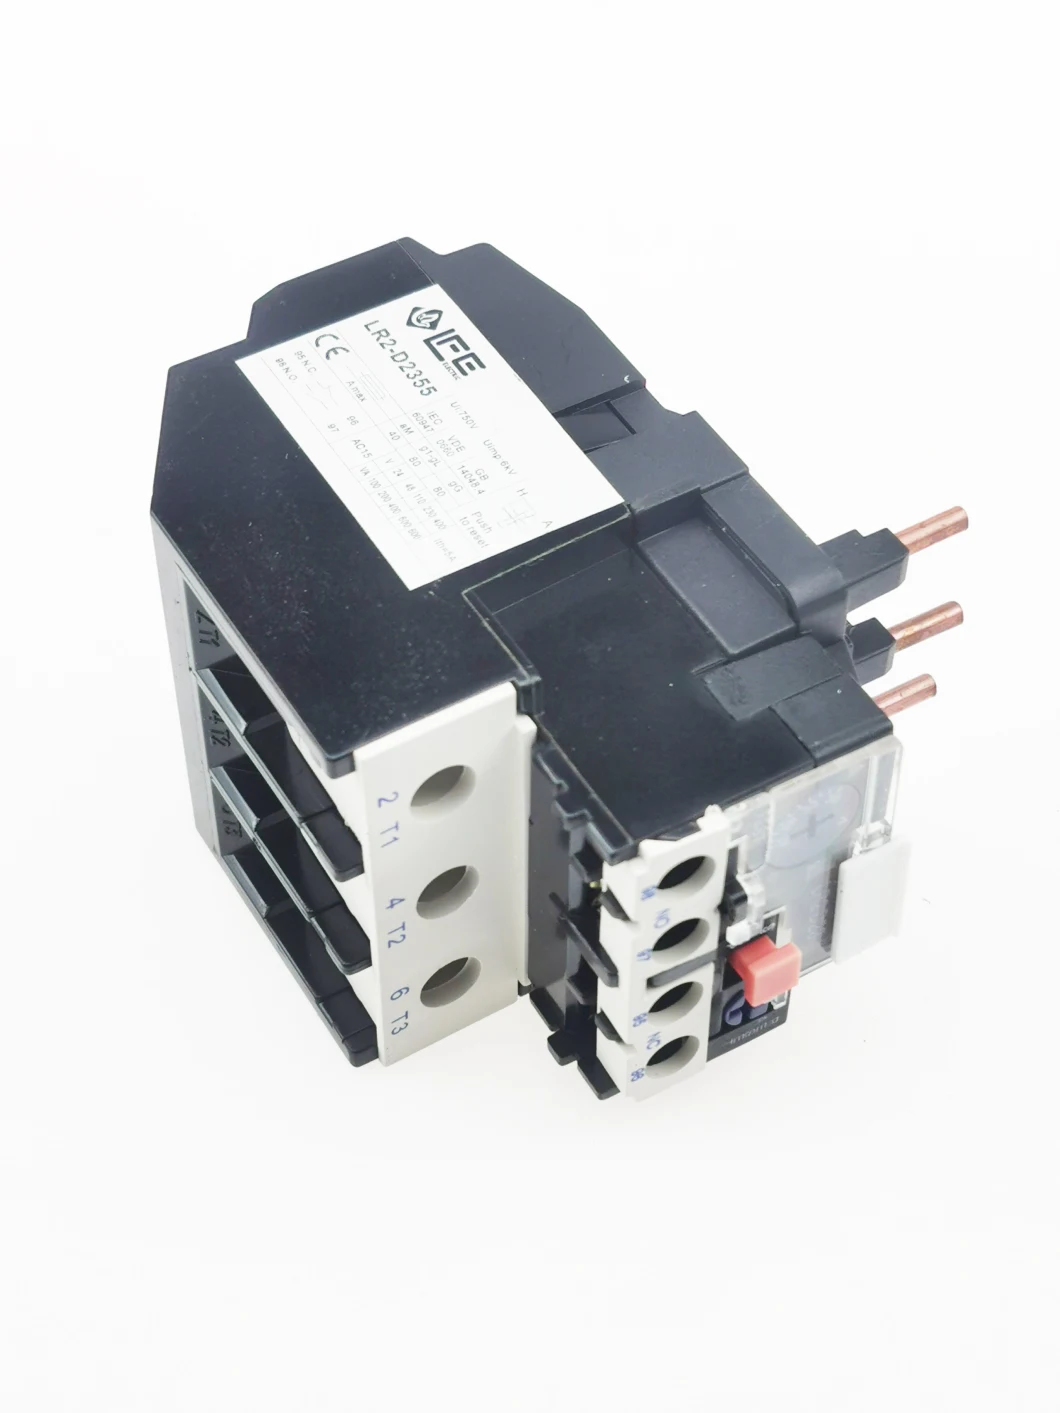 Lr2-D13 Thermal Overload Relay, ISO9001 Passed High Quality Thermal Relay, CE Proved Thermal Overload Irelay